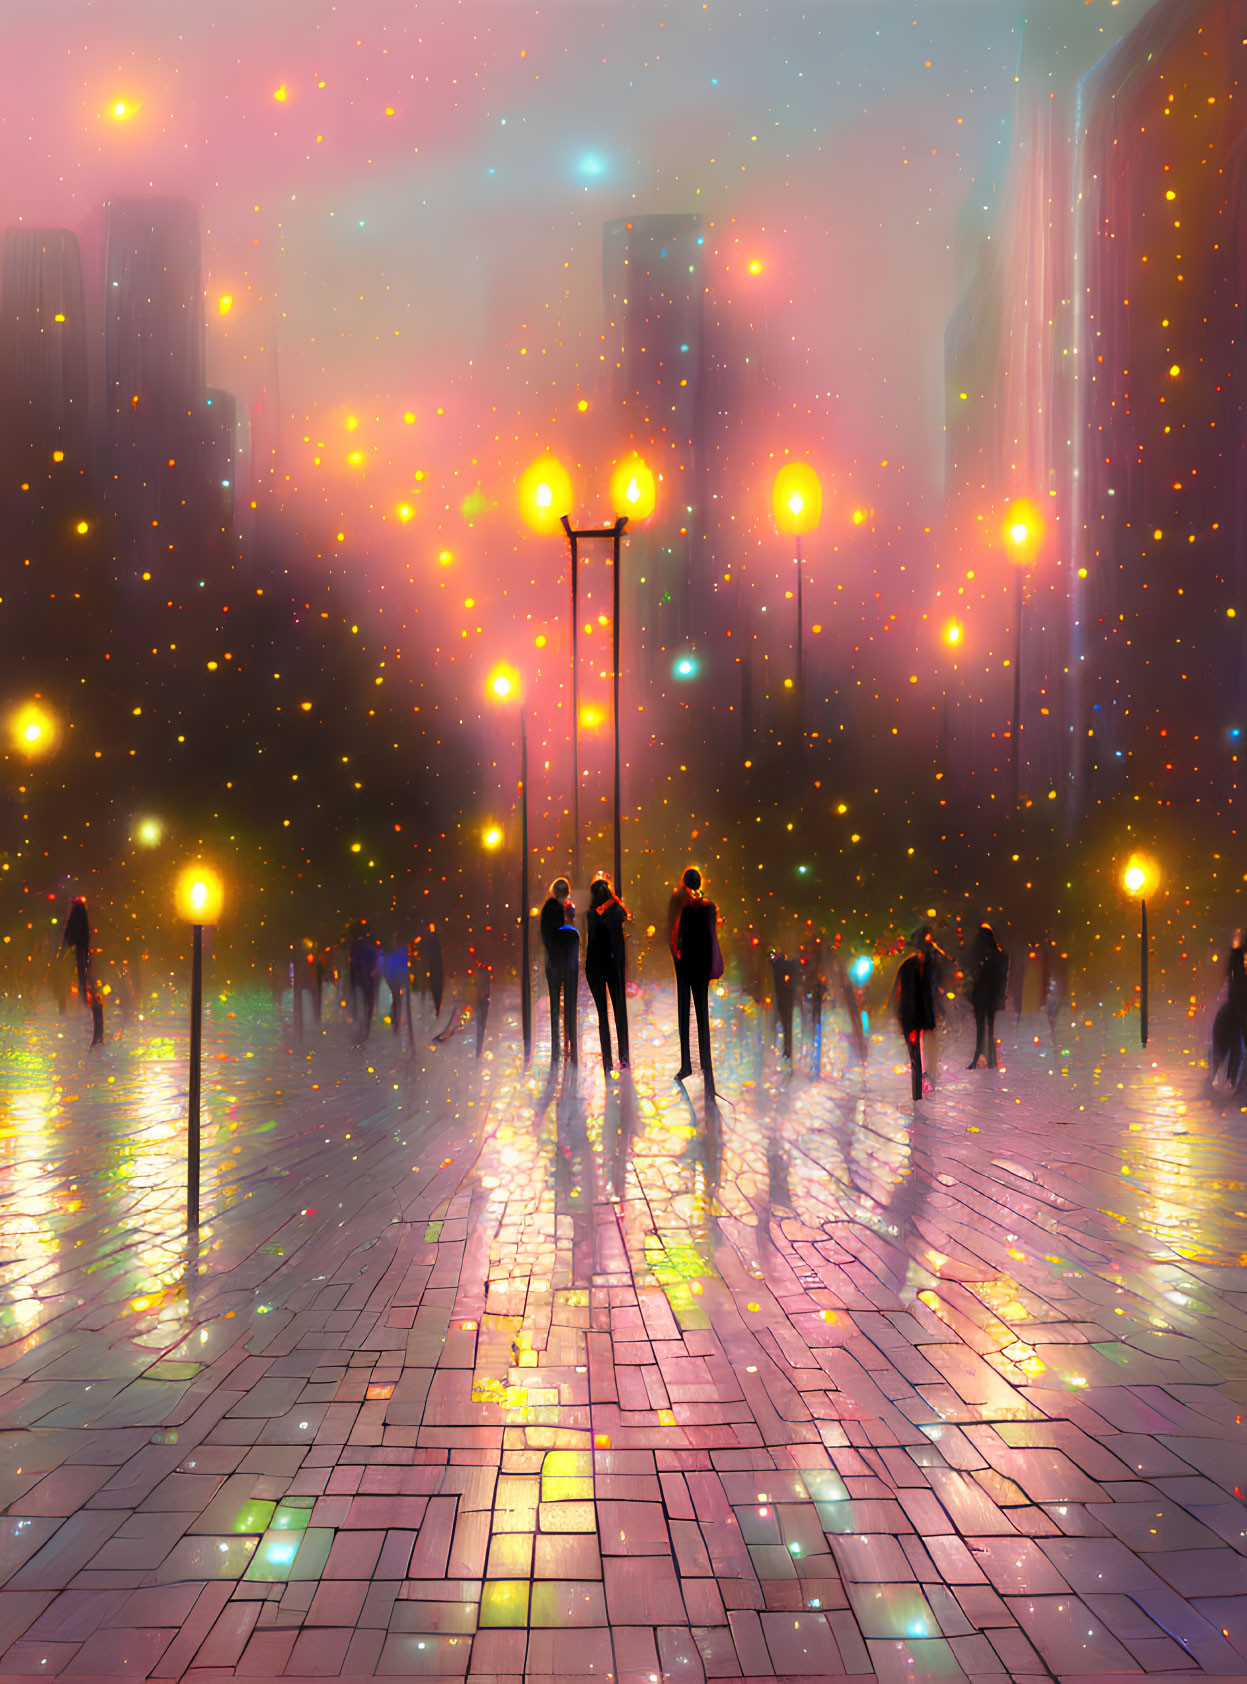 Colorful cityscape with glowing street lamps and people walking in a hazy atmosphere